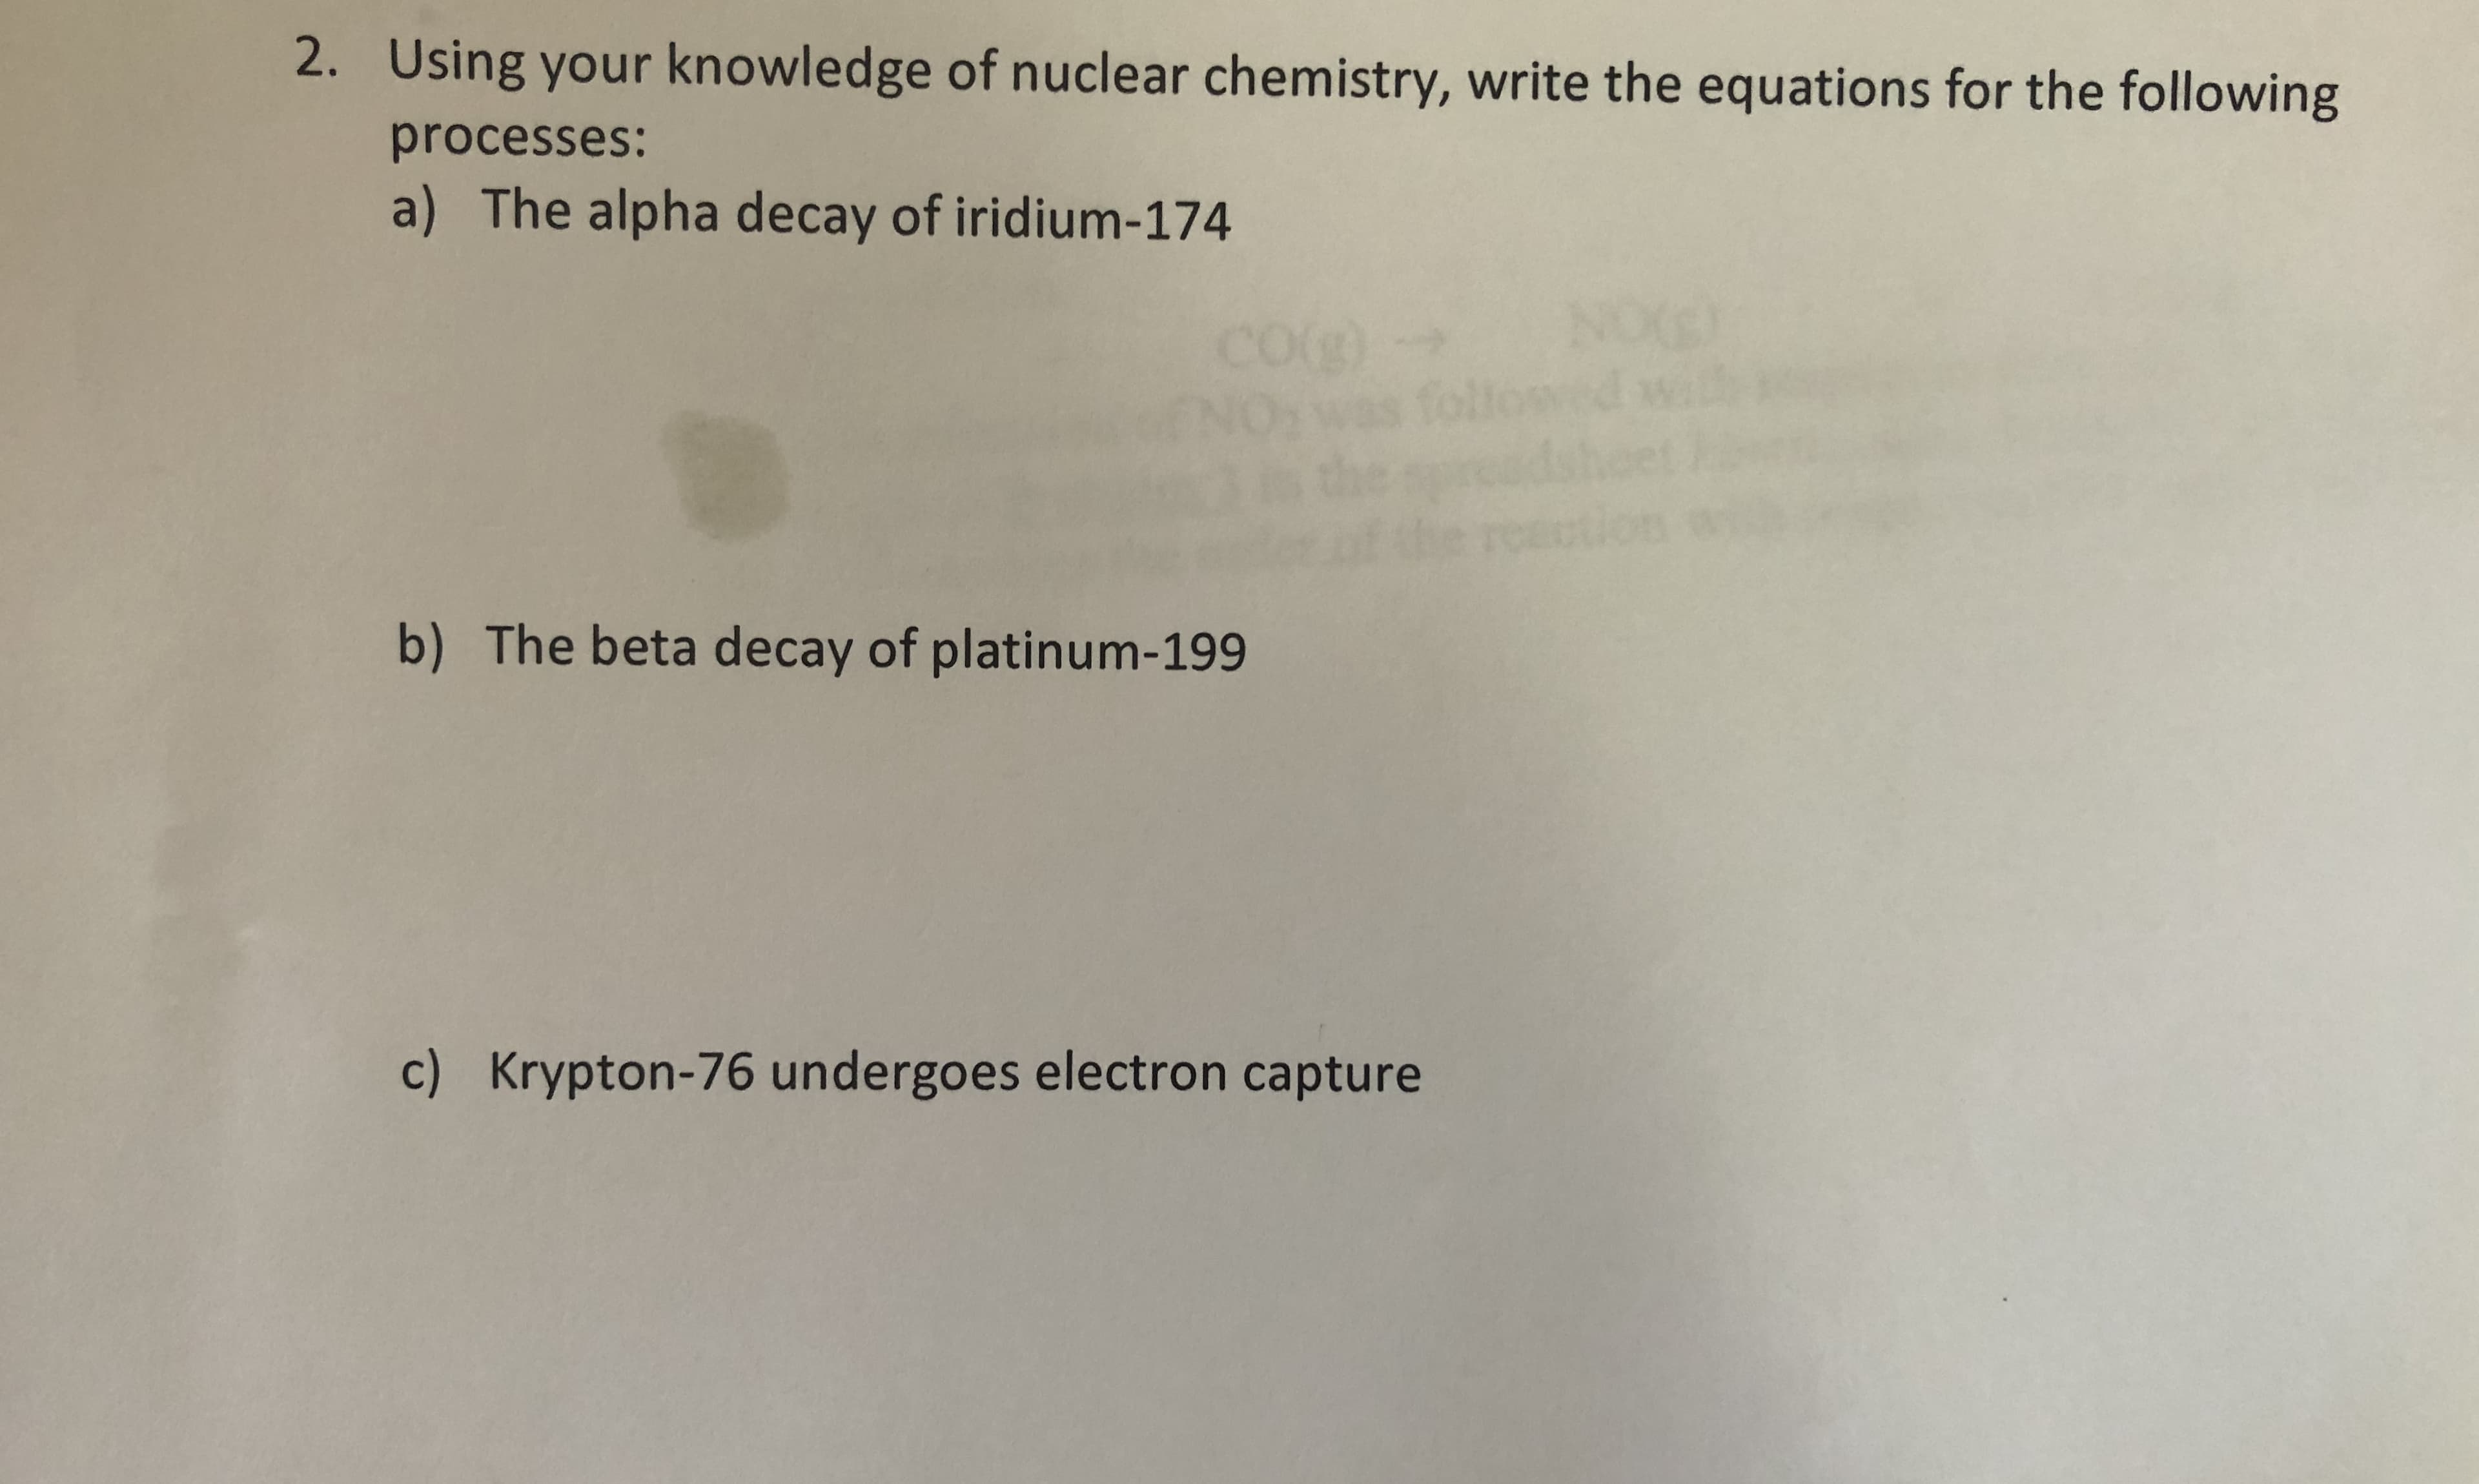 2. Using your knowledge of nuclear chemistry, write the equations for the following
processes:
a) The alpha decay of iridium-174
COg)
NOE
ollowed wi
raction
b) The beta decay of platinum-199
c) Krypton-76 undergoes electron capture
